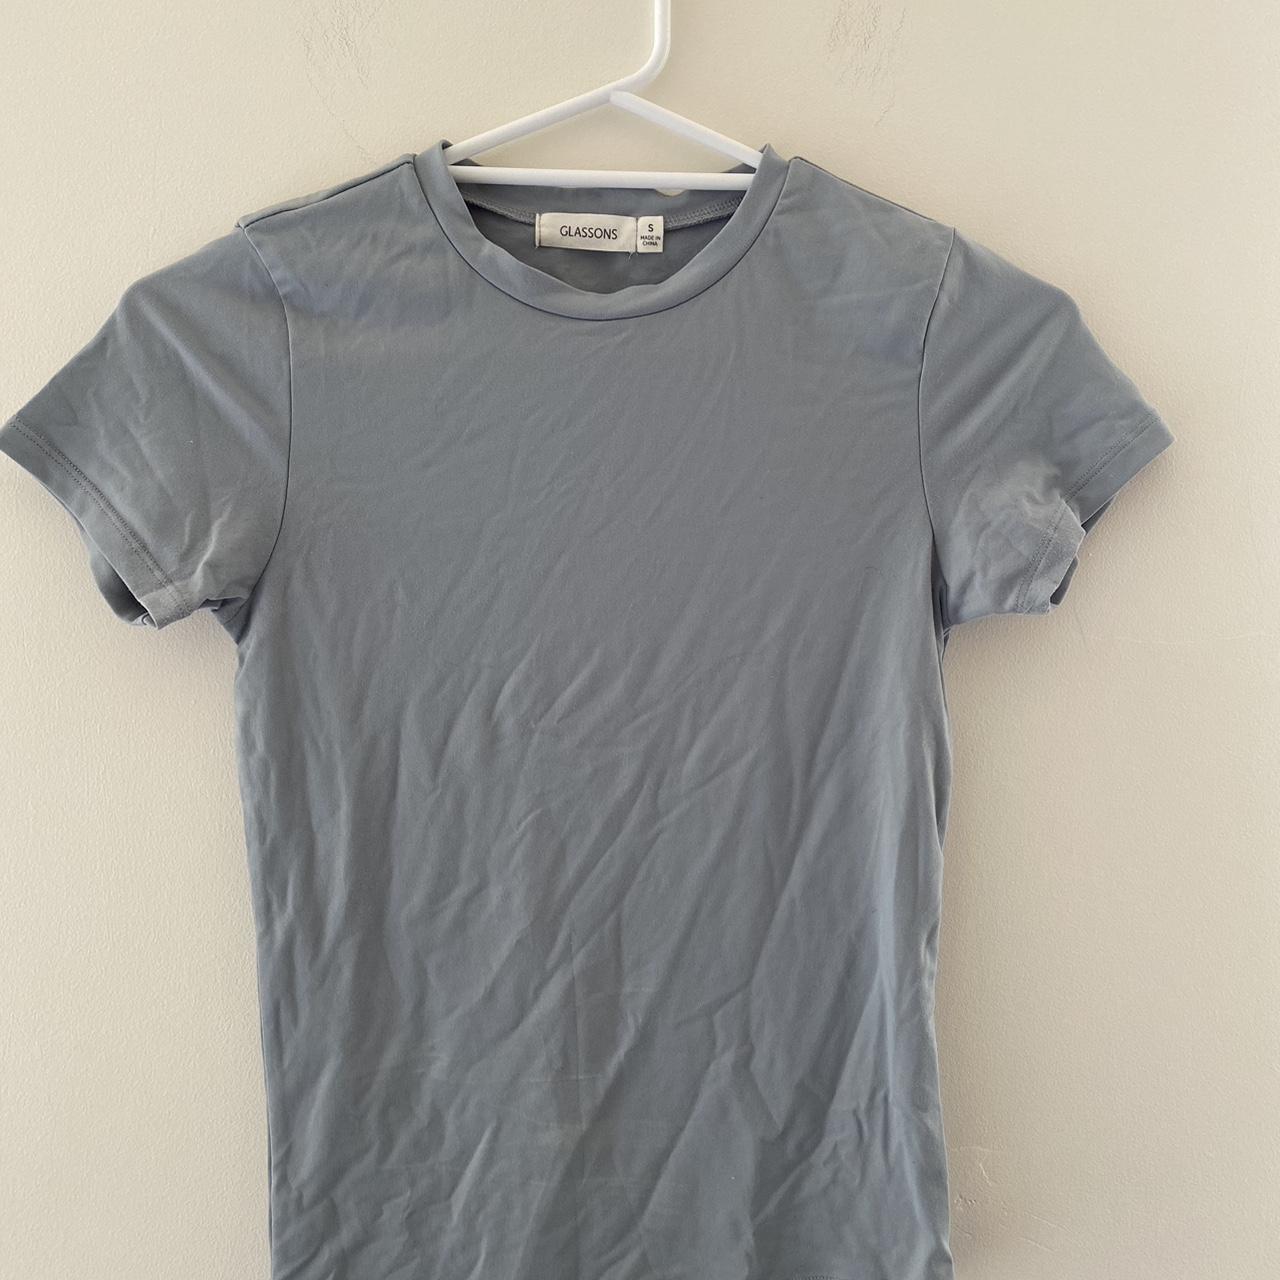 glassons grey super soft tee size s good condition - Depop